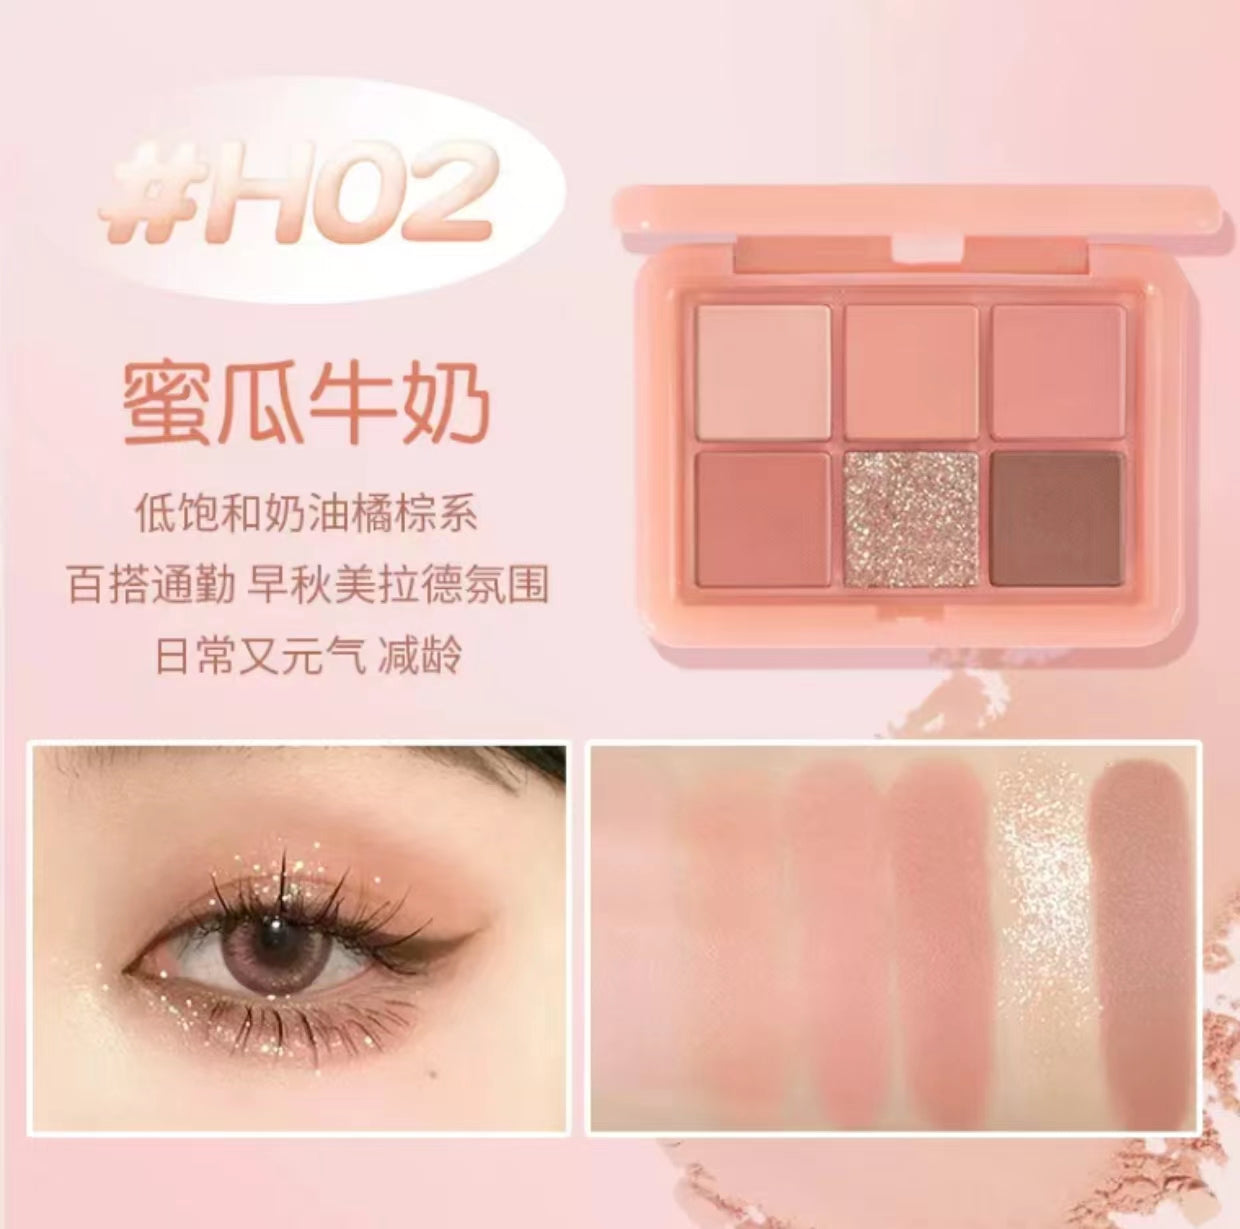 Holdlive Pink Jelly Eyeshadow Palette 9g 候爱小粉冻六色眼影盘